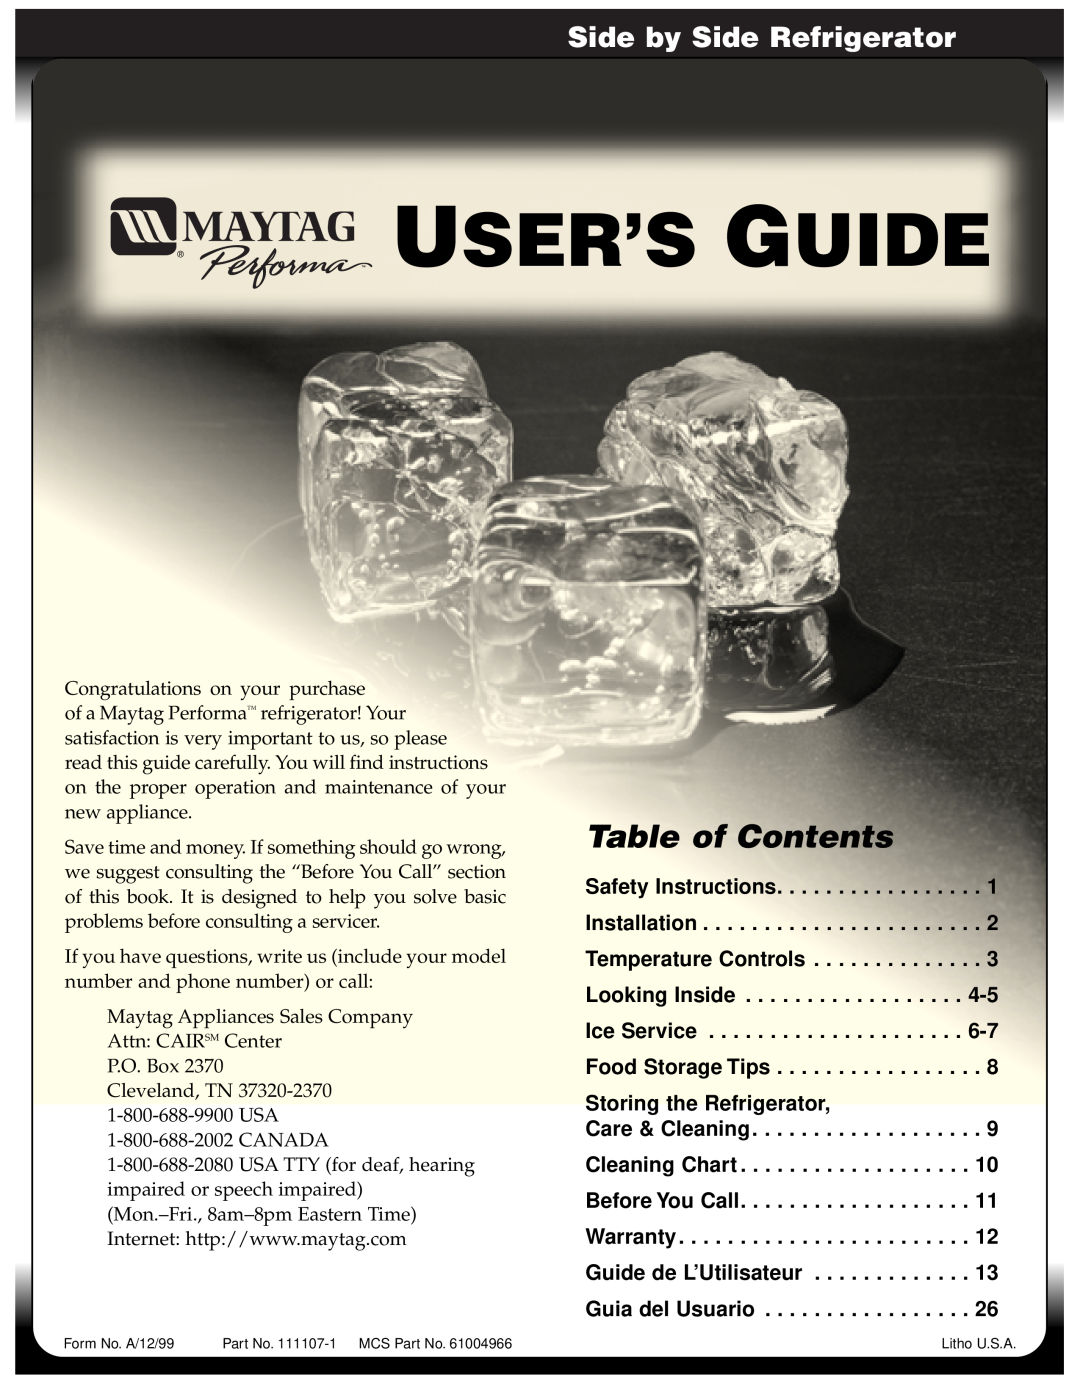 Maytag 61004966, SXS 111107-1 warranty User’S Guide, Table of Contents, Side by Side Refrigerator 